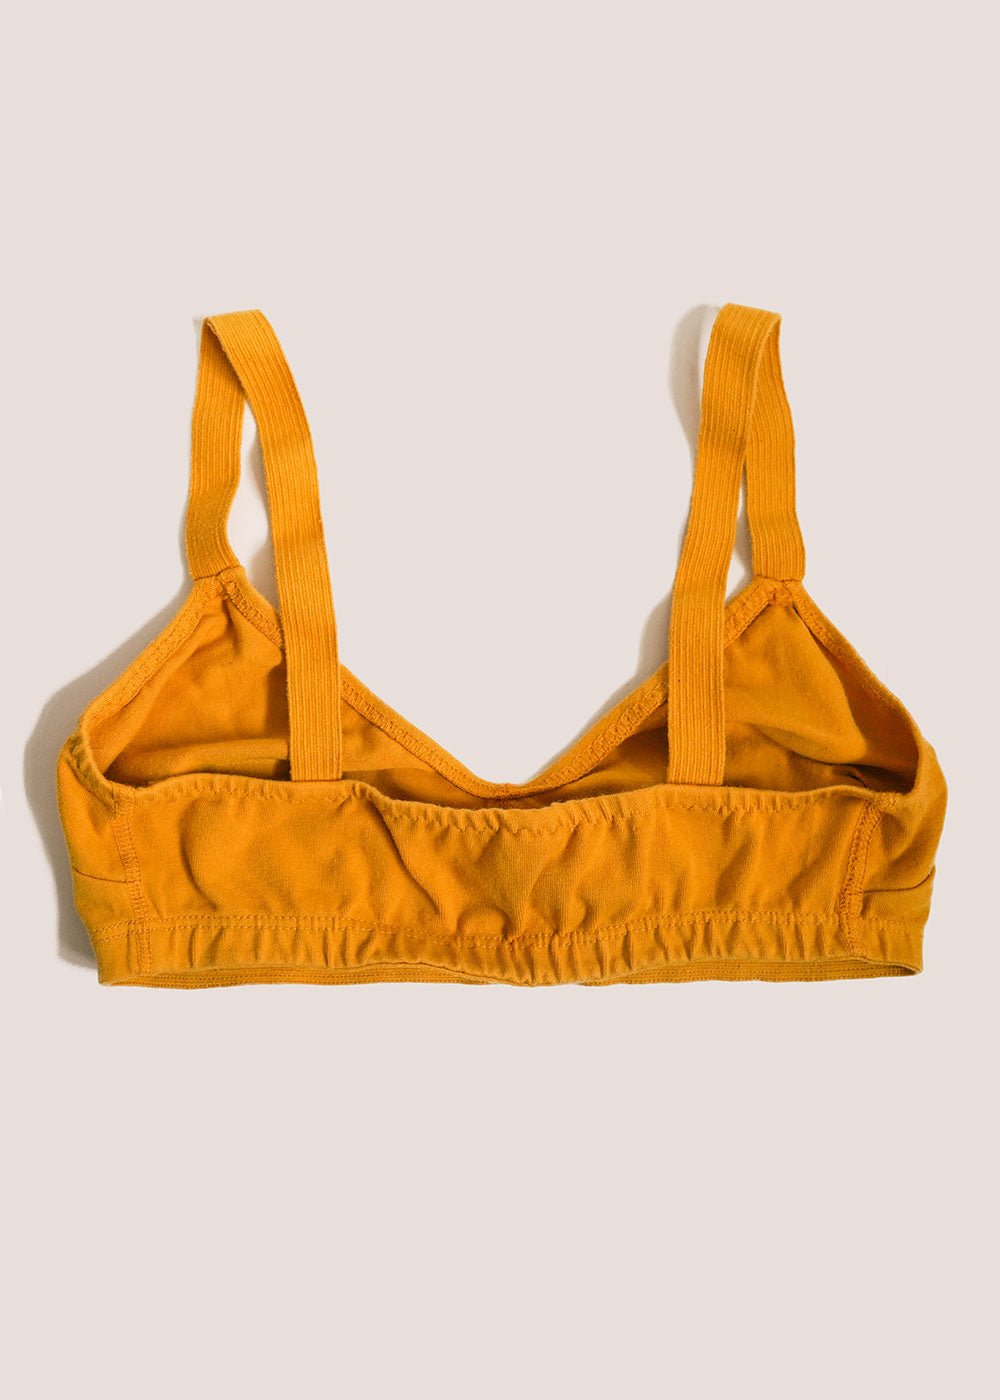 Pansy Sunflower Full Bra - New Classics Studios Sustainable Ethical Fashion Canada